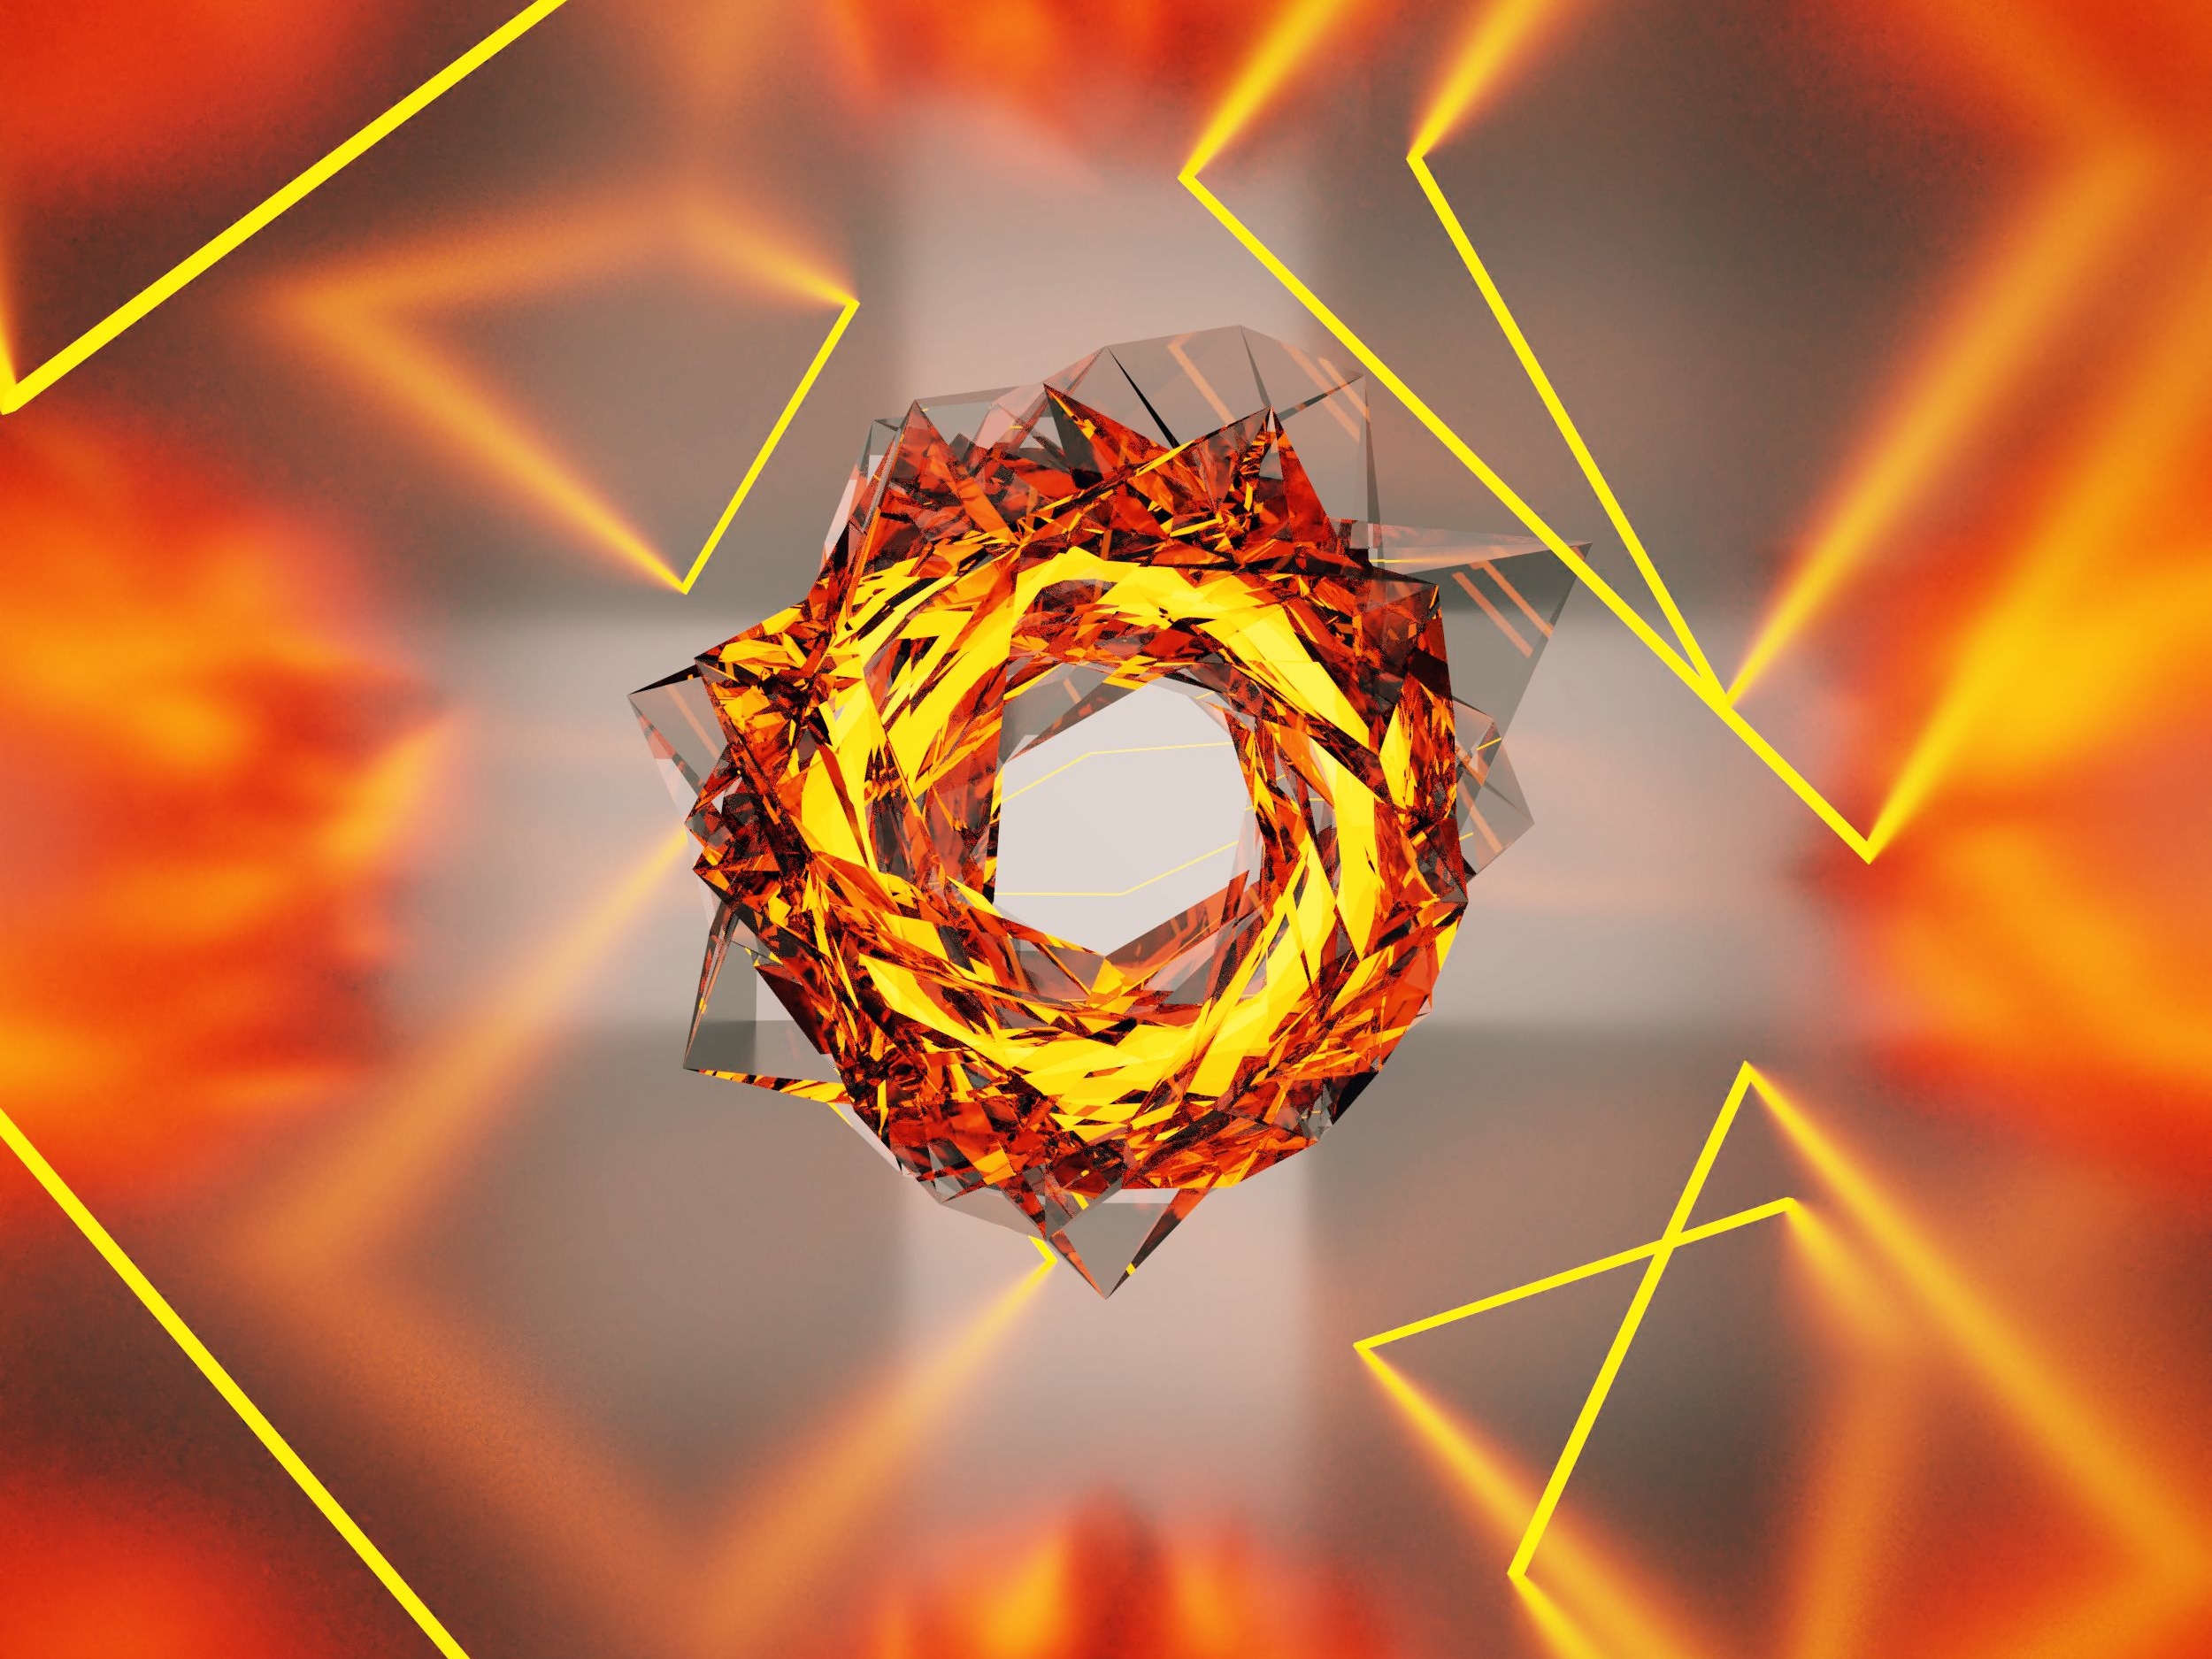 ring abstract 3d by eduard leszczynski on dribbble ring abstract 3d by eduard leszczynski